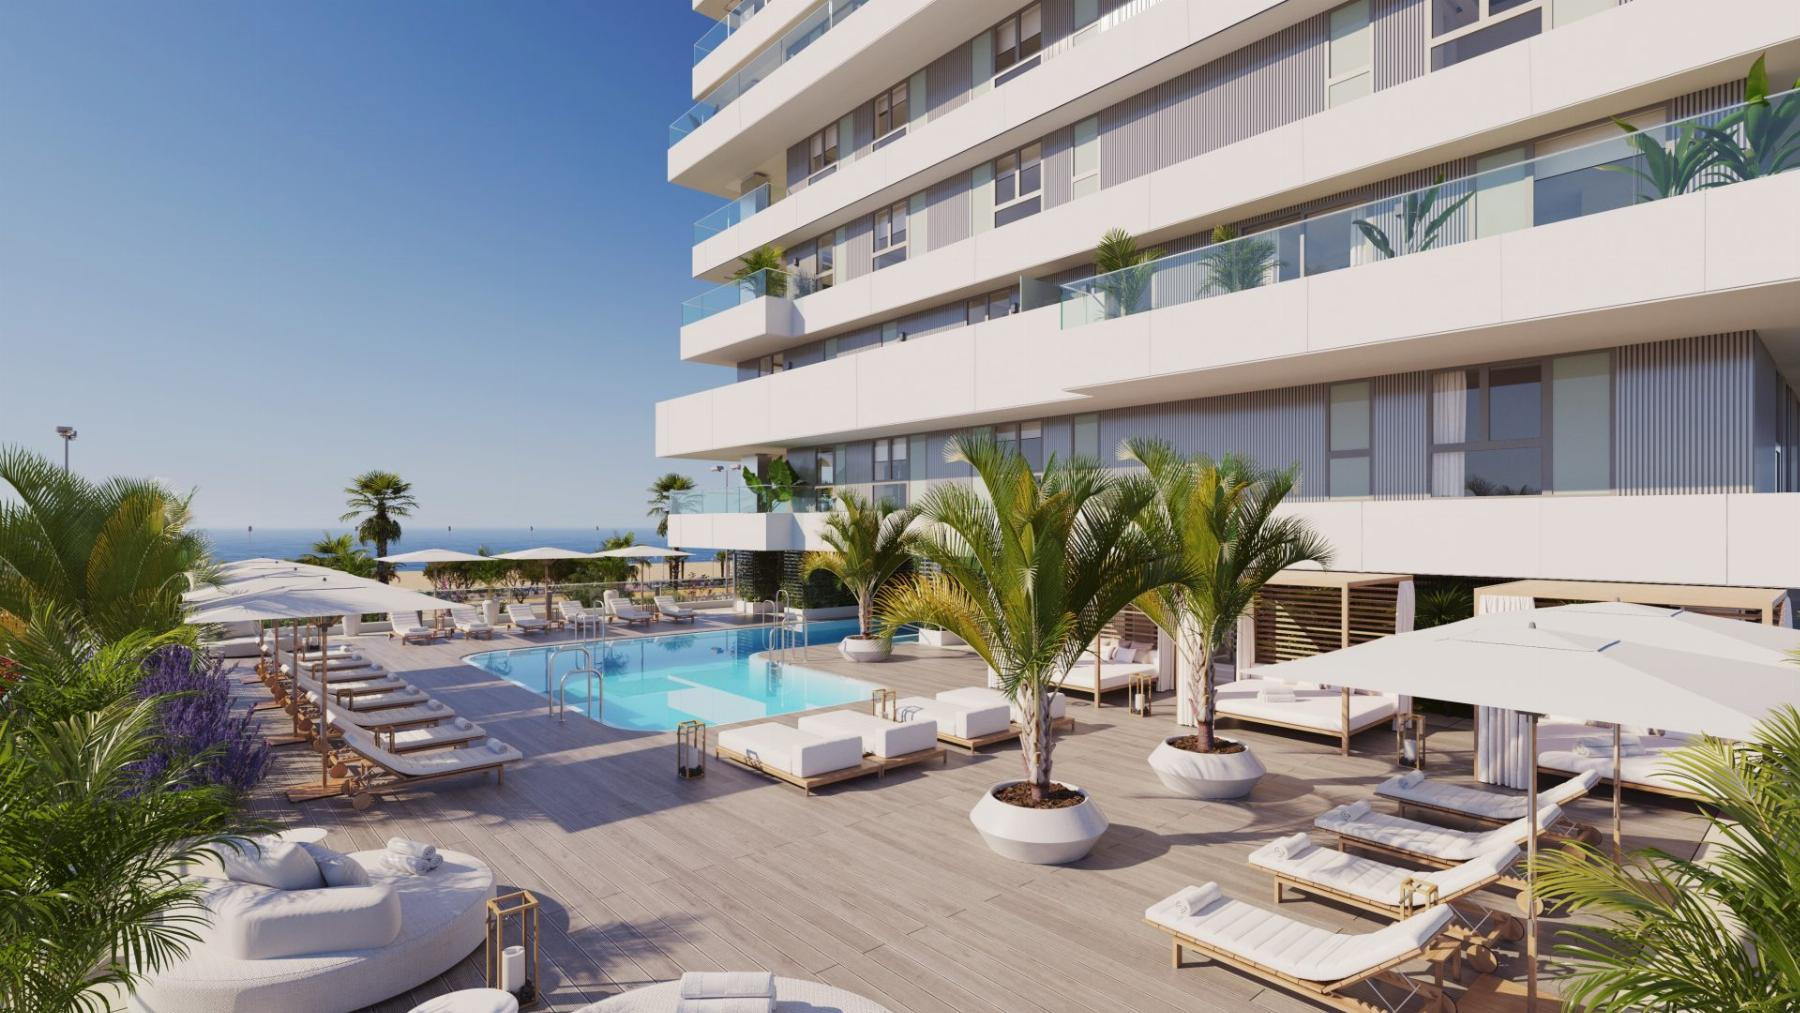 Malaga Towers: Luxury homes in the city of Malaga. | Image 1